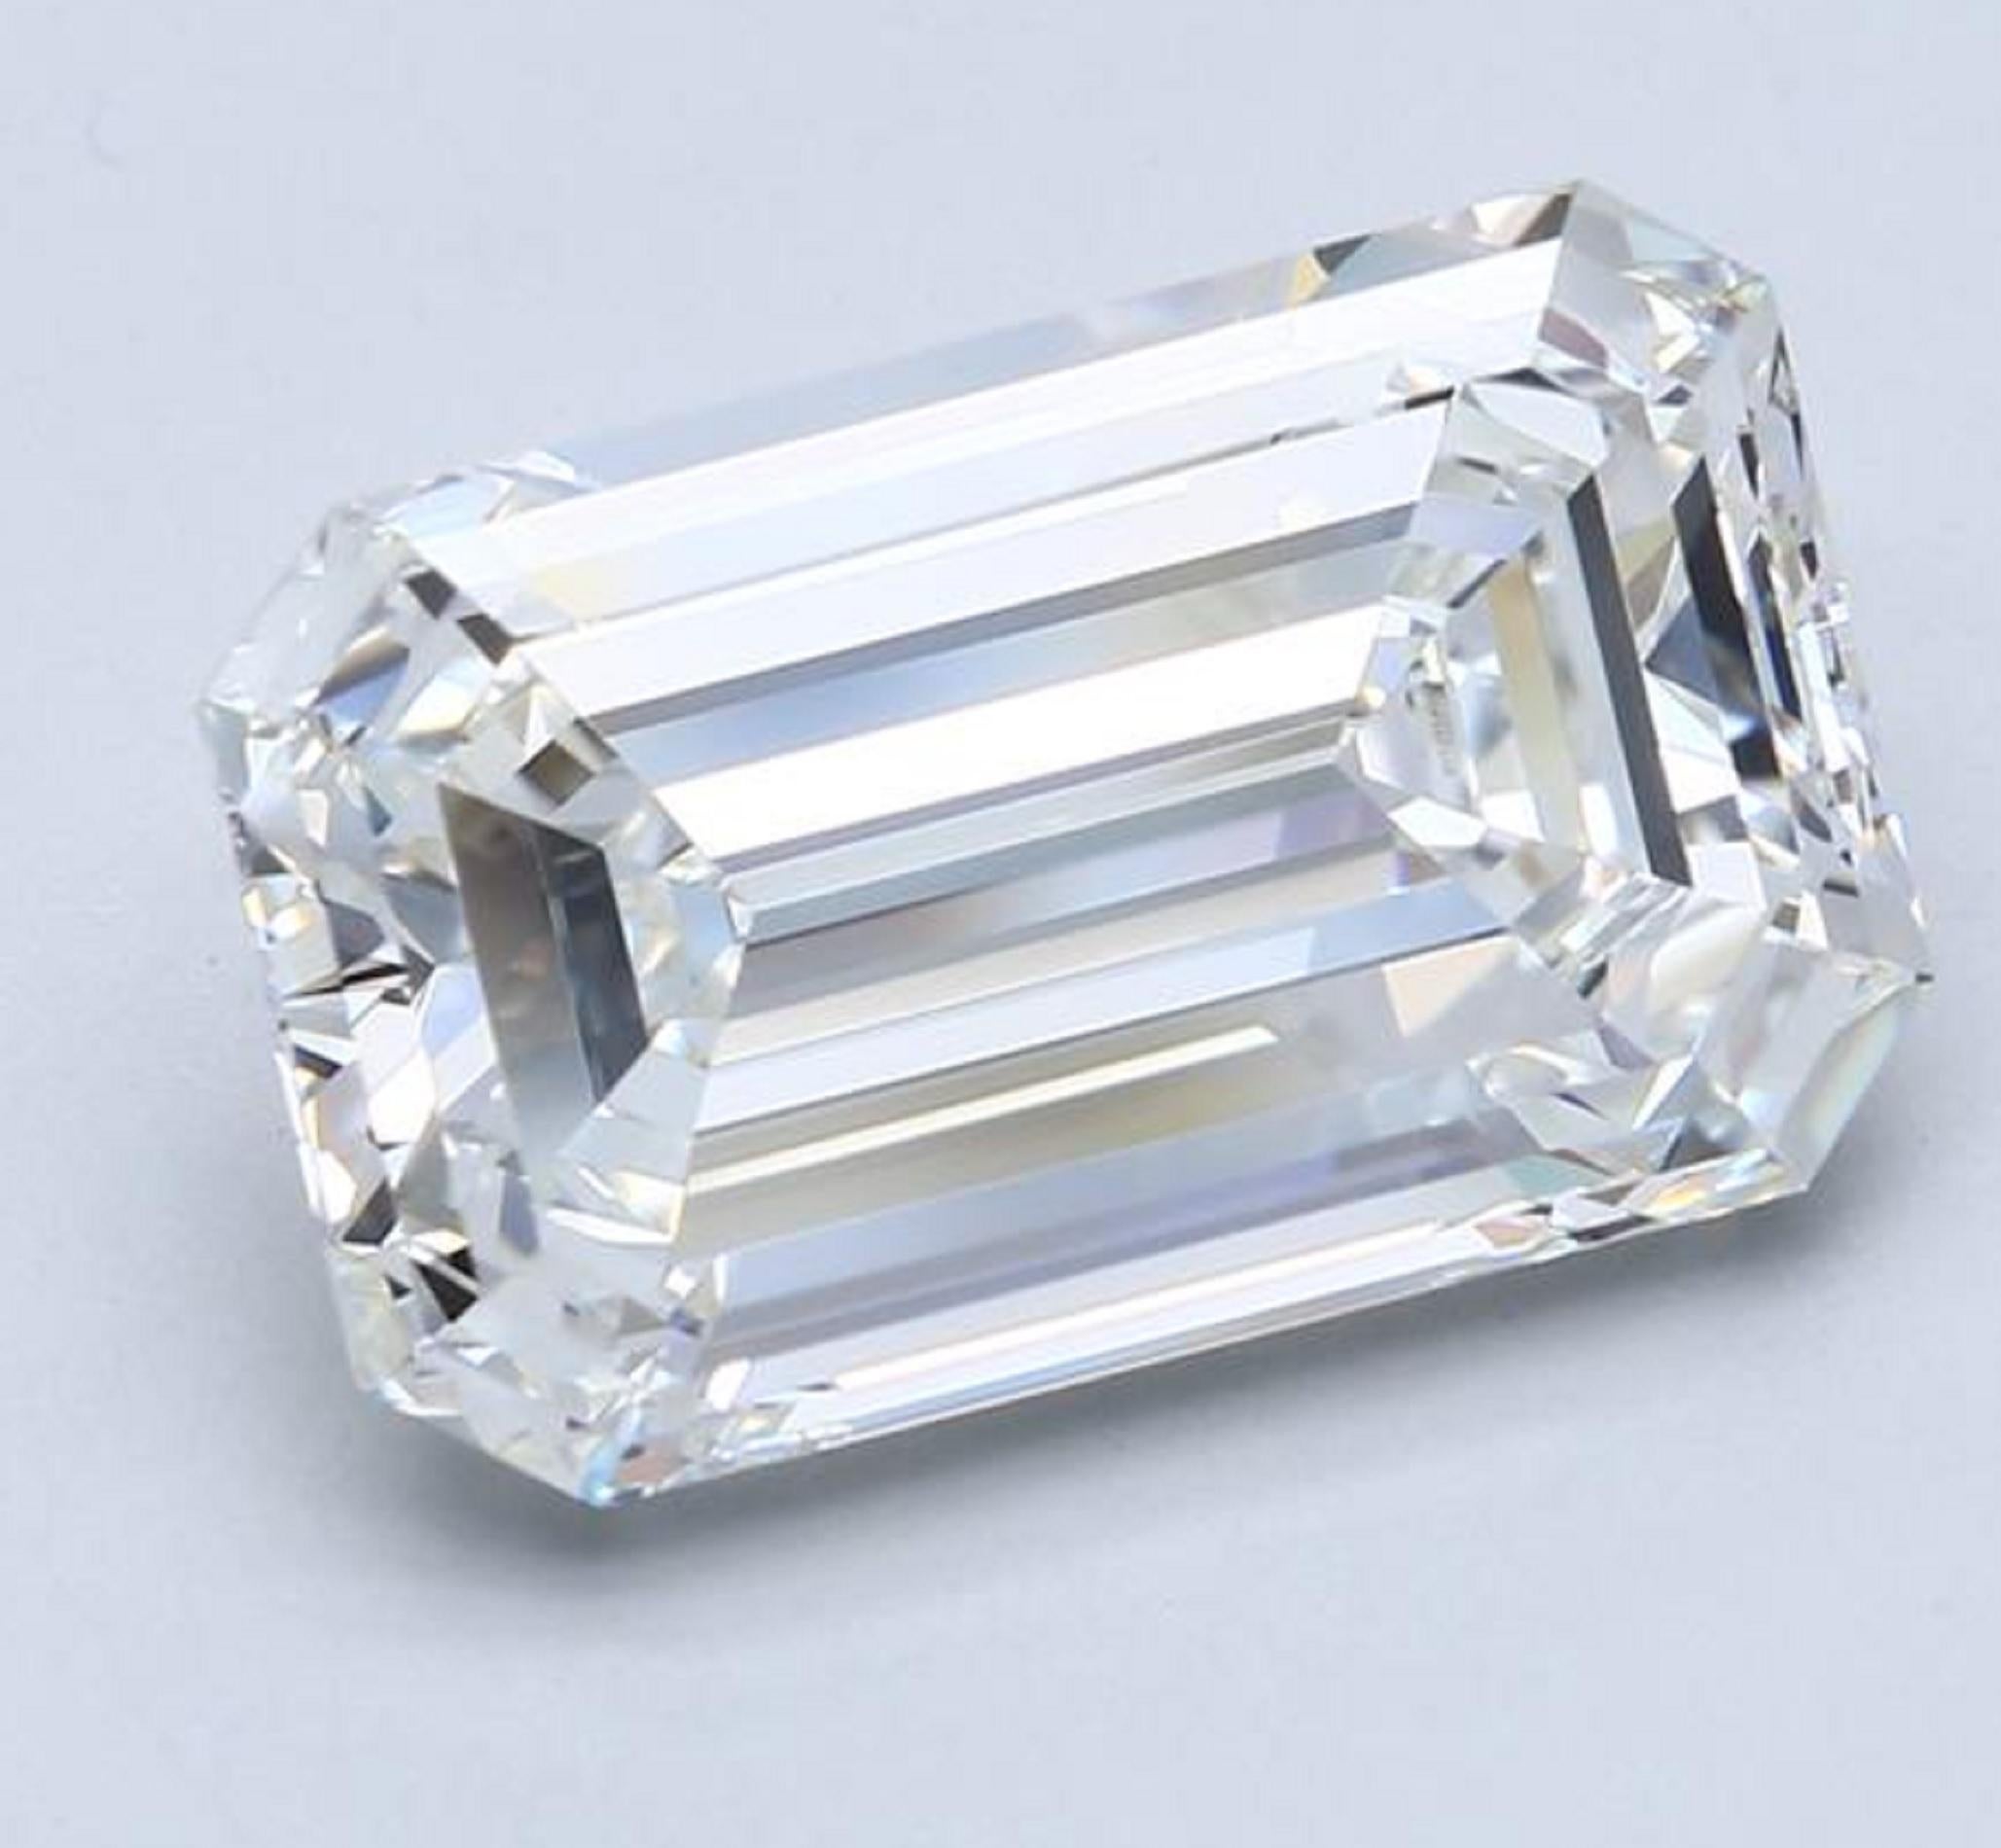 GIA Certified Three Stone Emerald Cut Diamond Ring
Ideal proportions
the main stone is 4 carats

Also the side diamonds are GIA certified 

